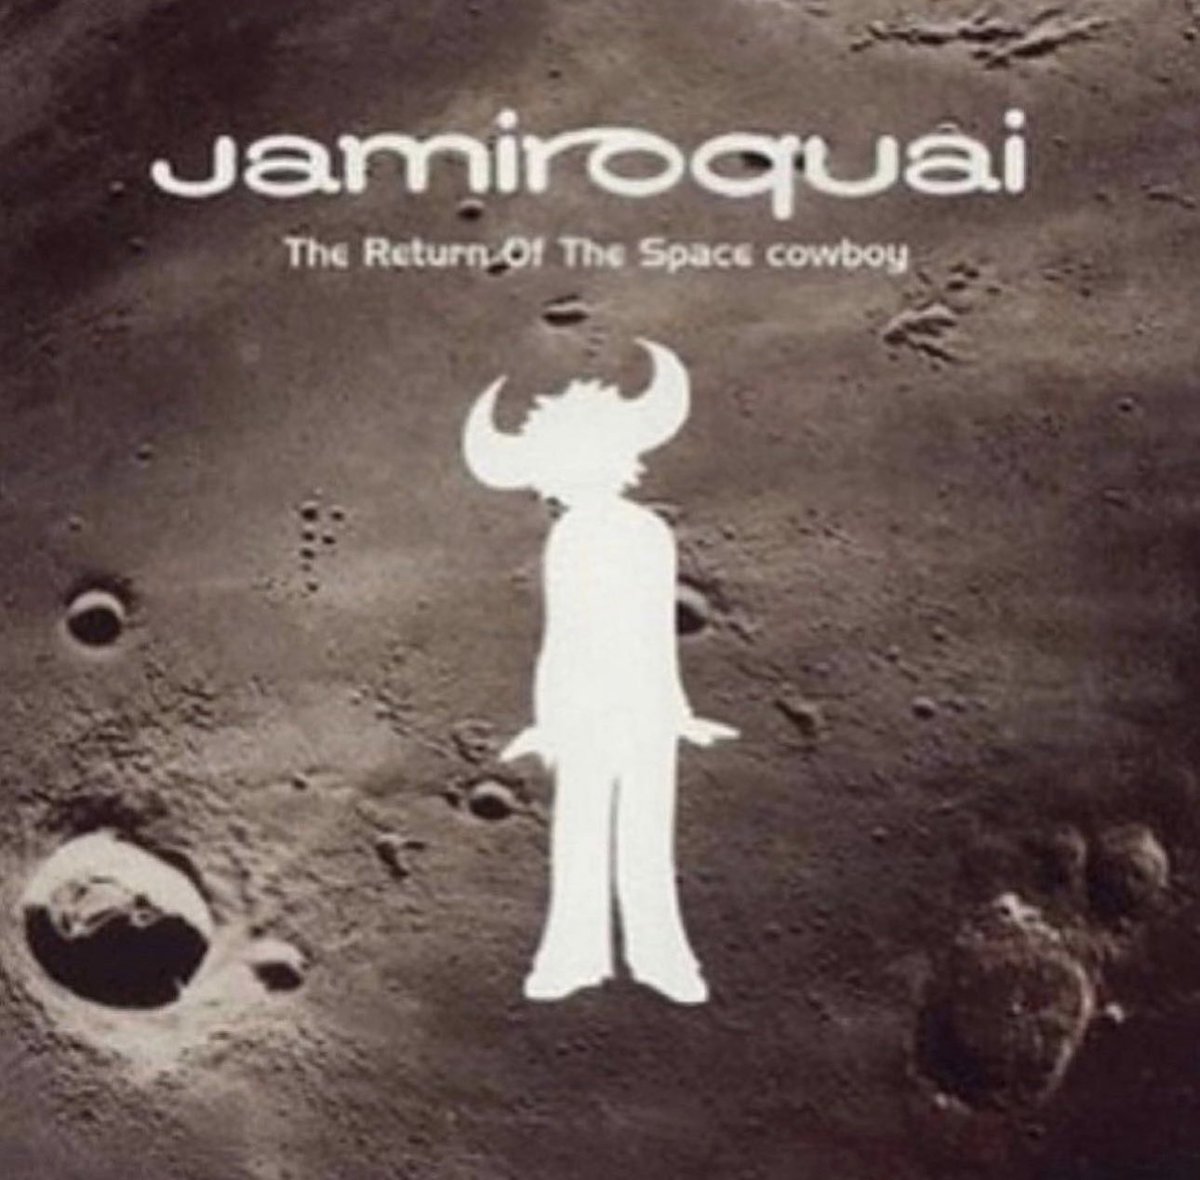 Released in the US on this day in 1995, ‘The Return Of The Space Cowboy’ is the 2nd studio album by @JamiroquaiHQ. Featuring the singles “Light Years” and the title track, remixed by @DJDavidMorales, and in heavy rotation during the @GrooveRadioUSA years. Happy 29th anniversary!